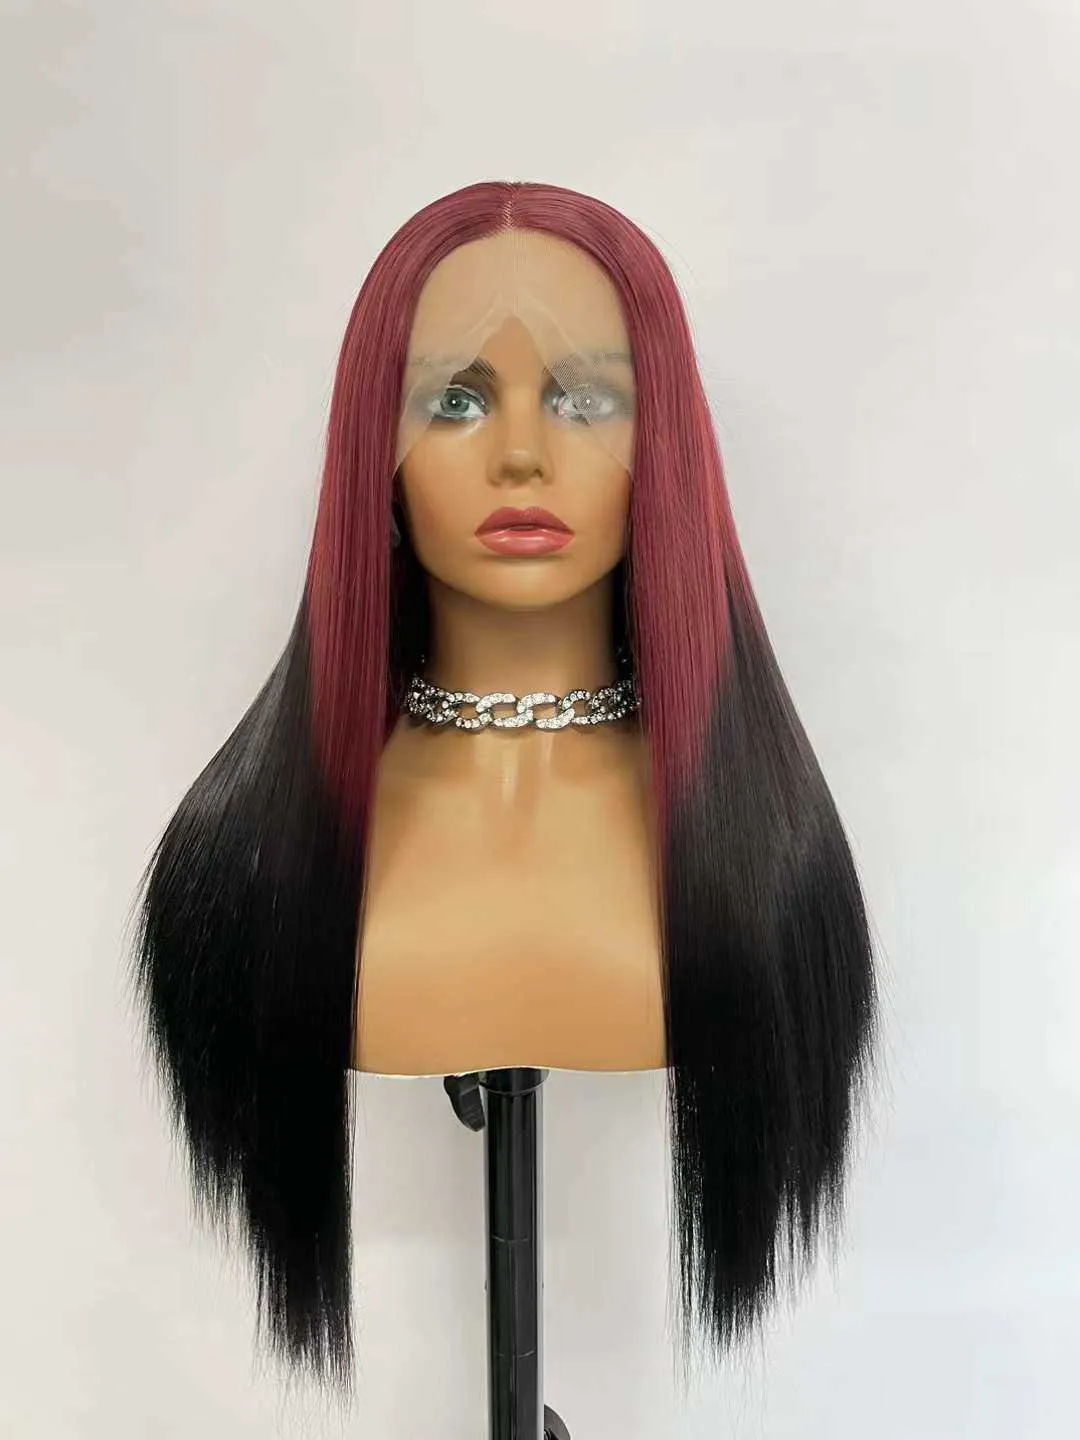 Lace Wigs Selling Women's Wig Front Lace Wig Women's 118# Long Straight Hair Chemical Fiber Wig Headband Wigs